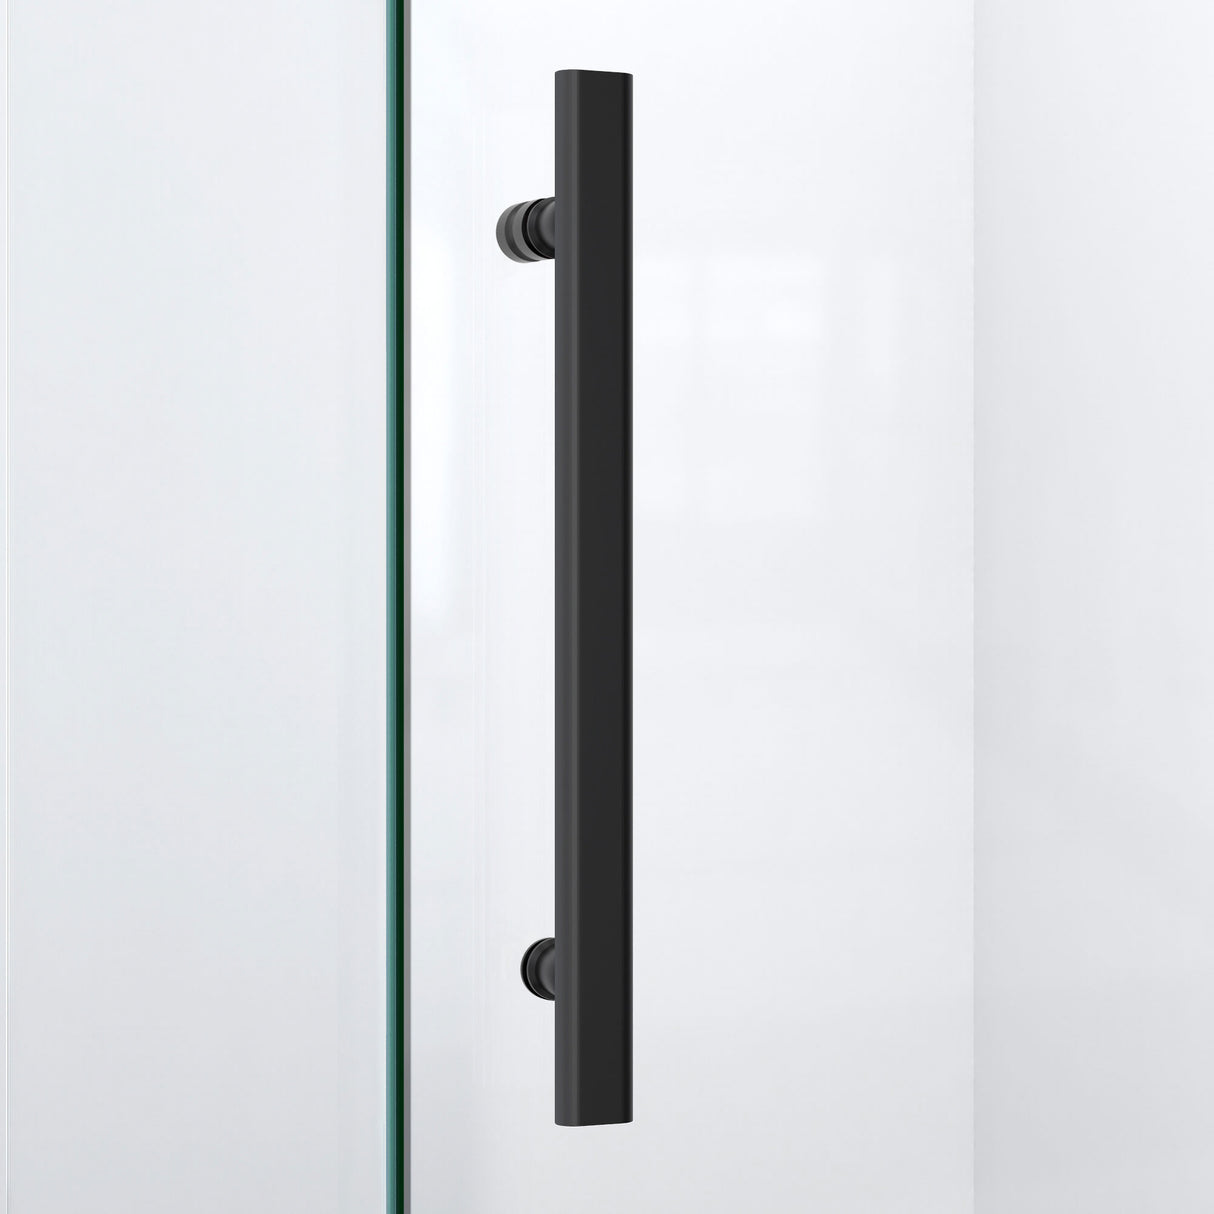 DreamLine Prism Lux 36 5/16 in. x 72 in. Fully Frameless Neo-Angle Hinged Shower Enclosure in Satin Black